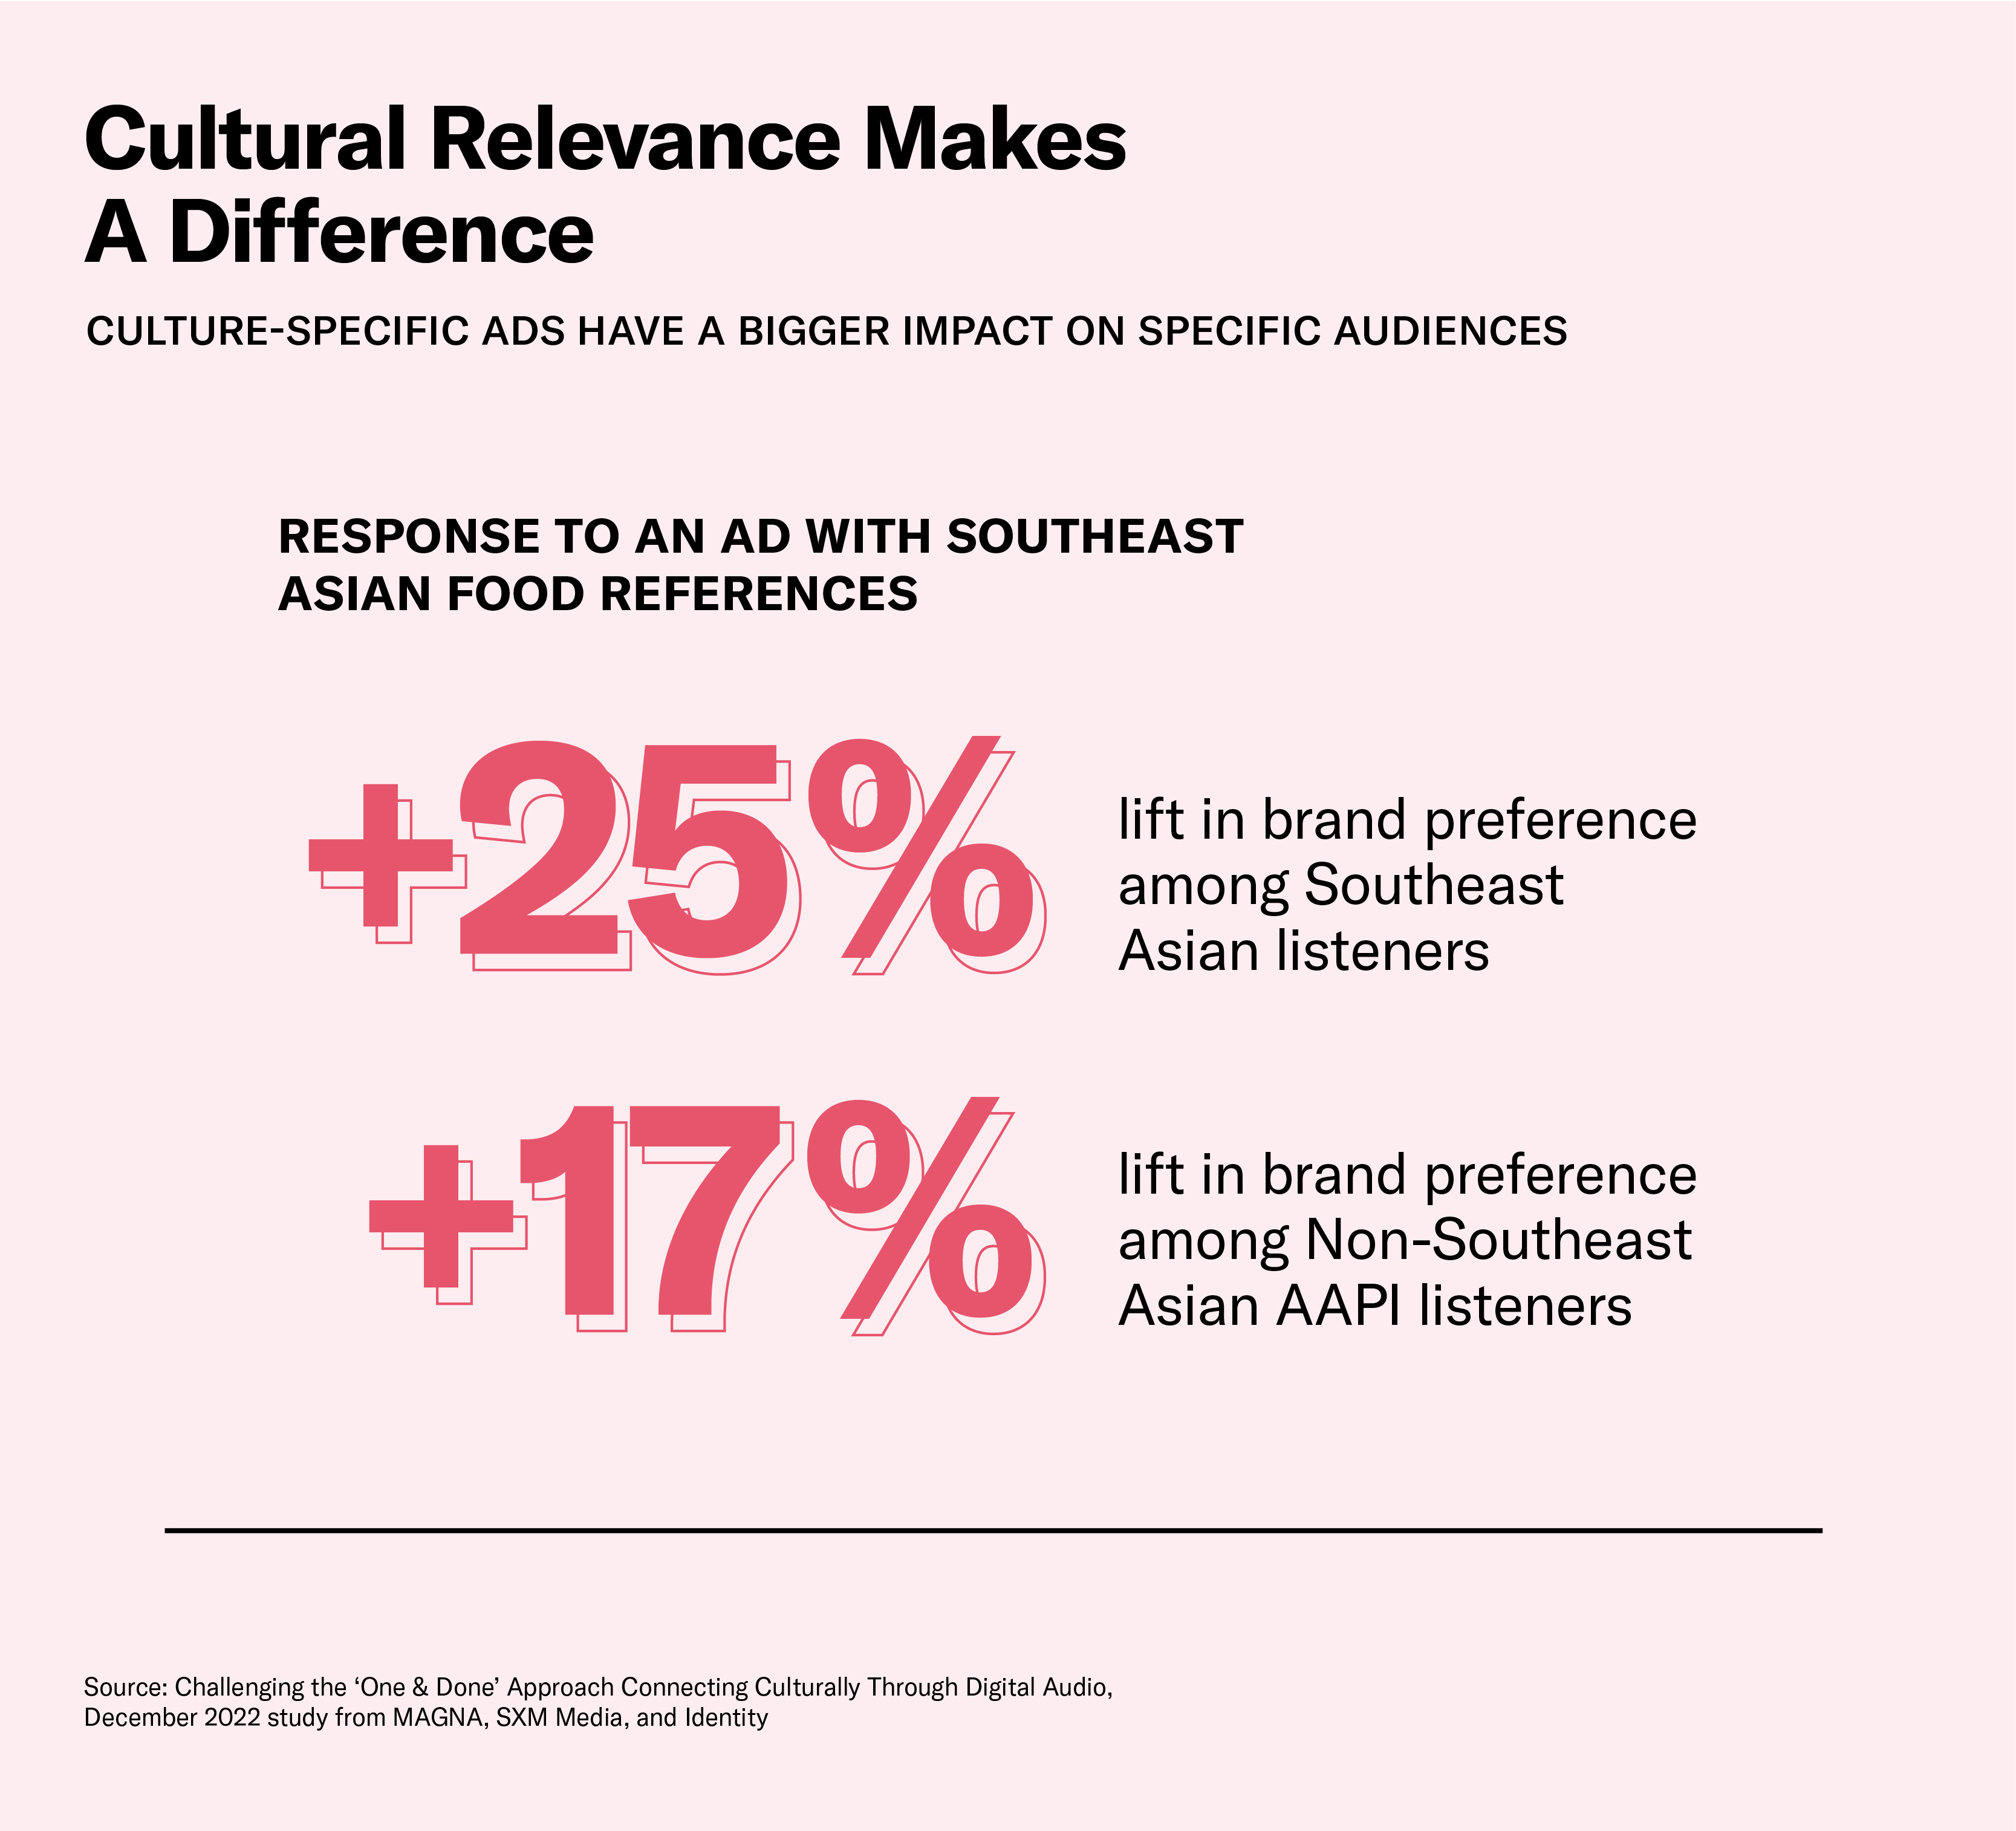 Cultural relevance makes a difference to Asian Americans